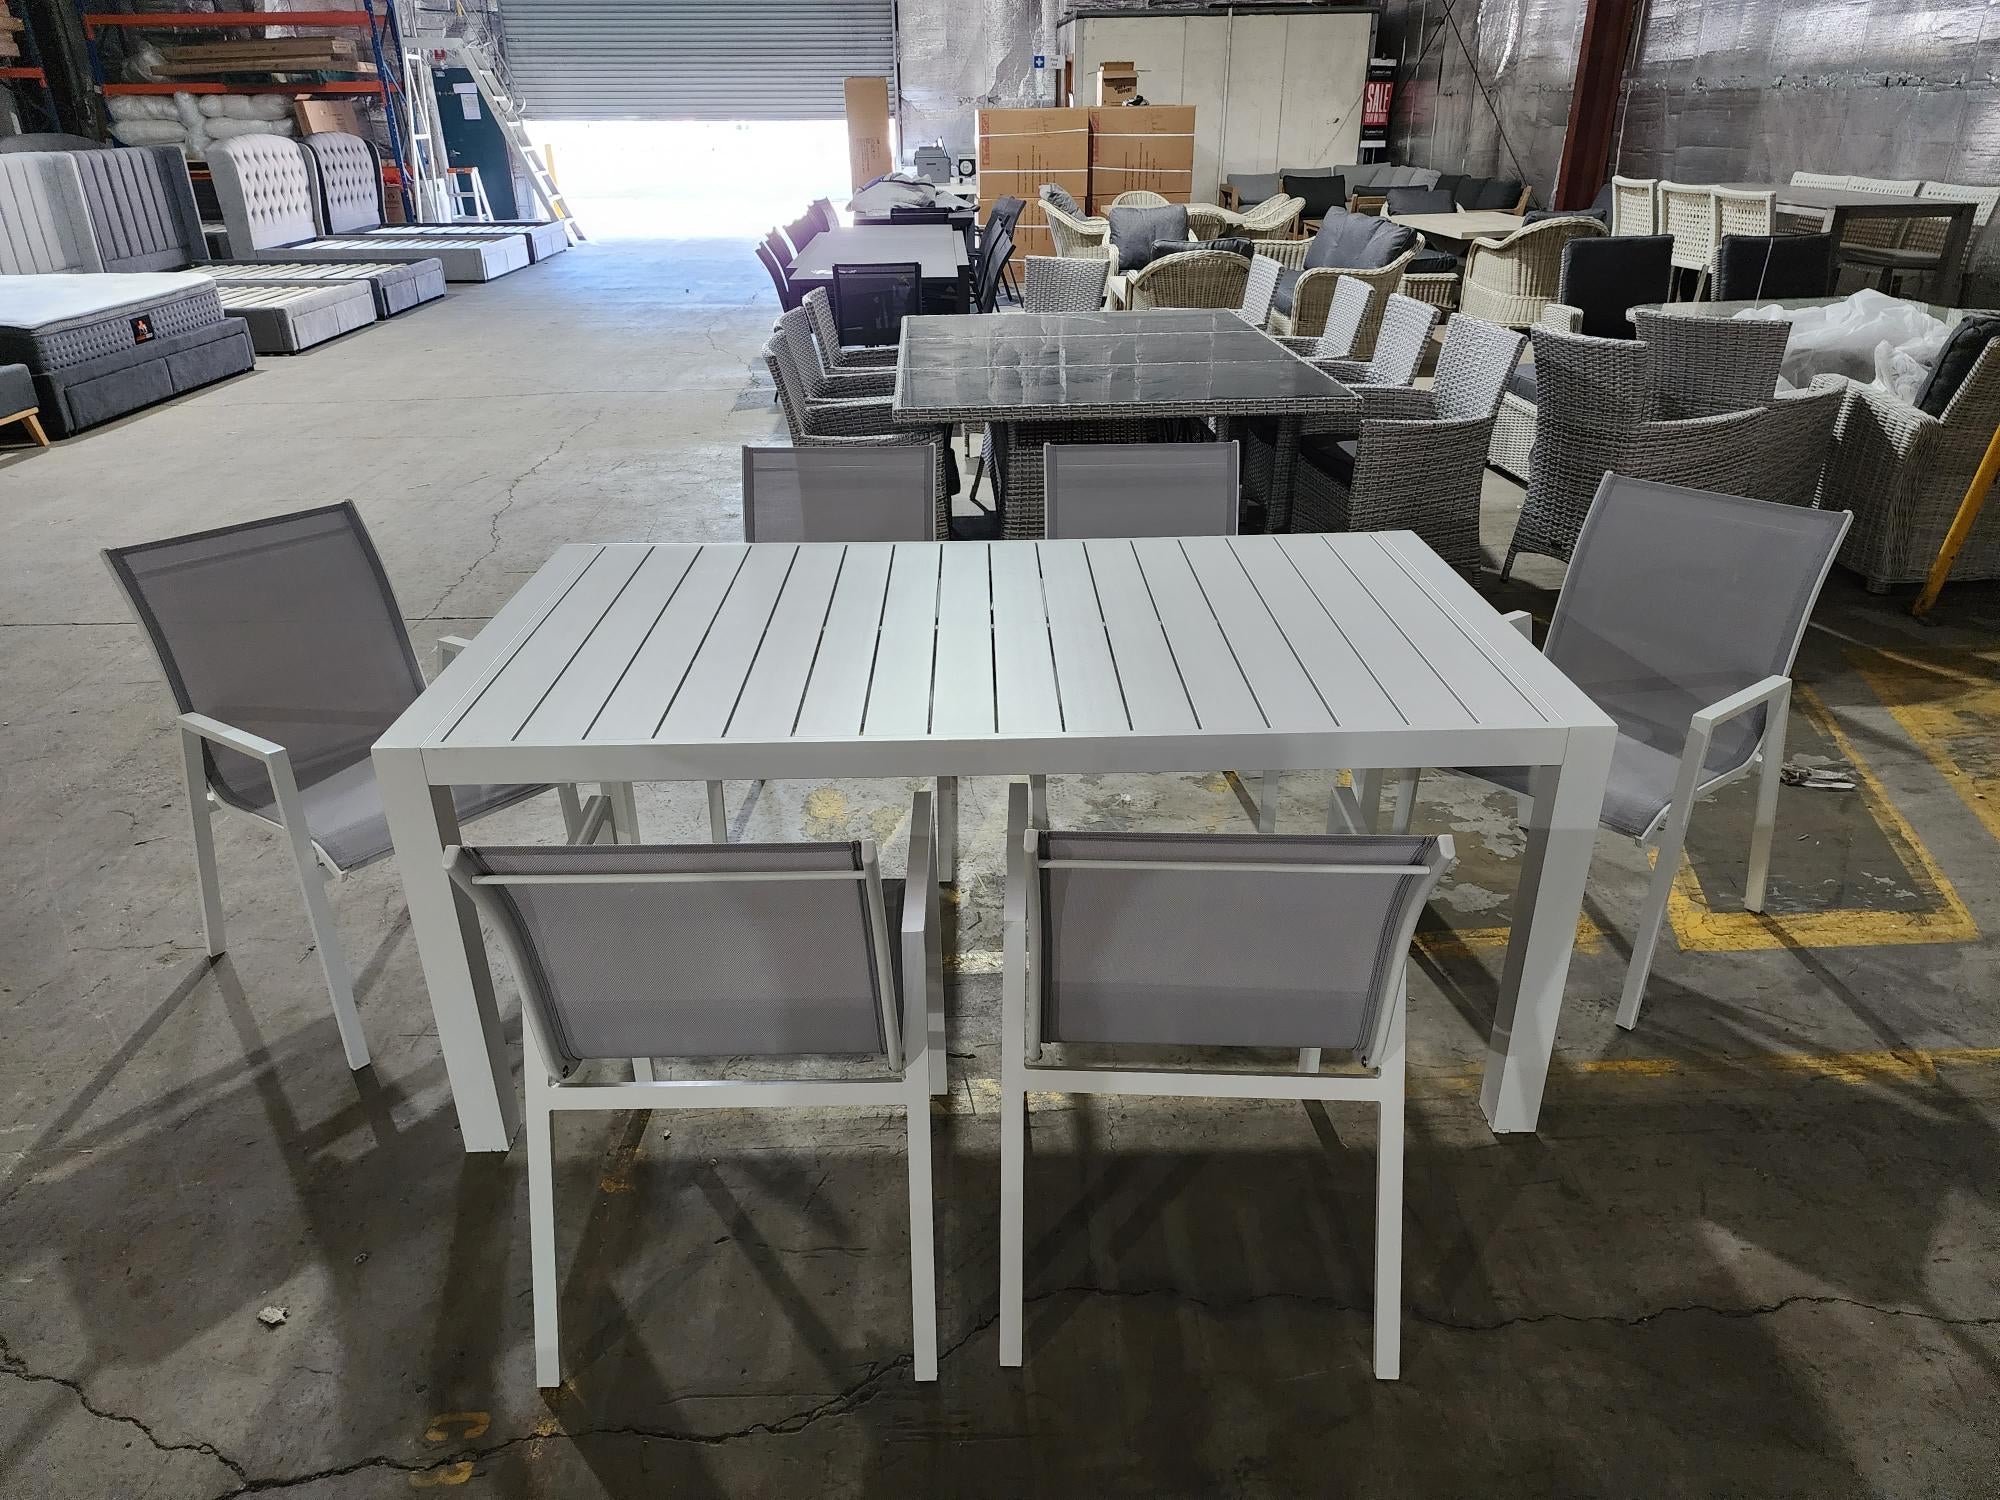 Icaria 7 piece outdoor dining setting - White